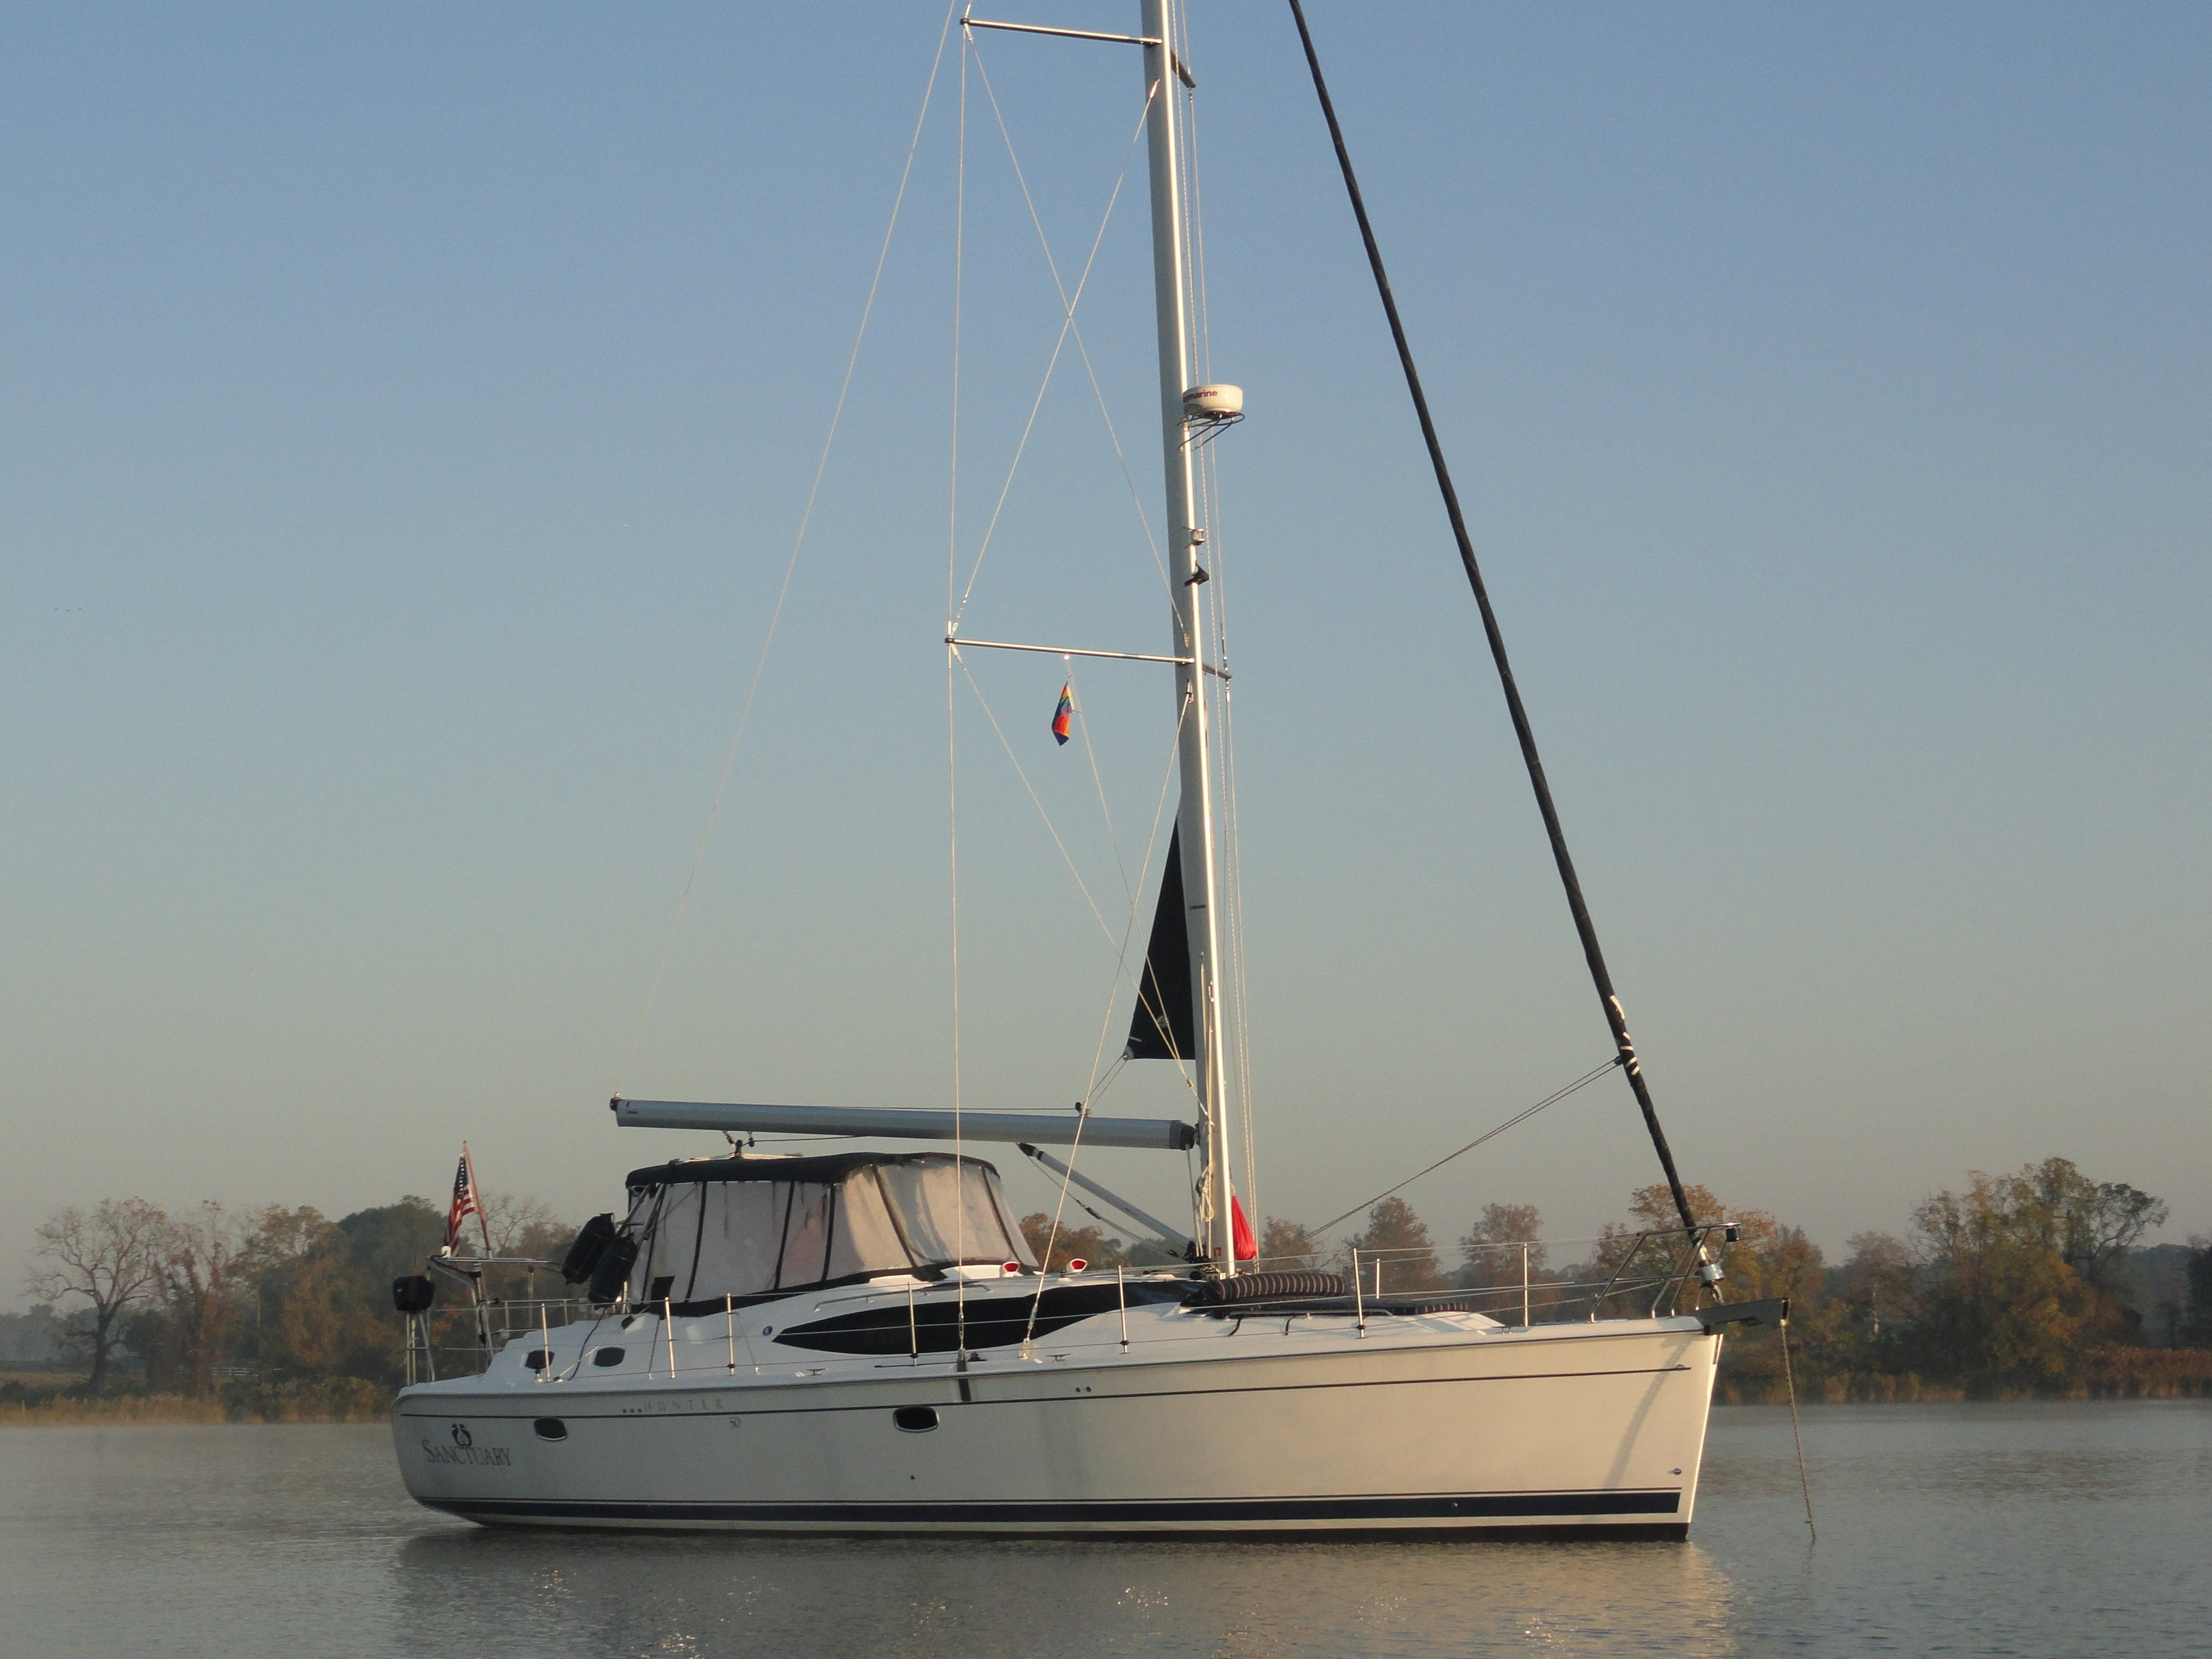 hunter sailboats for sale in bc